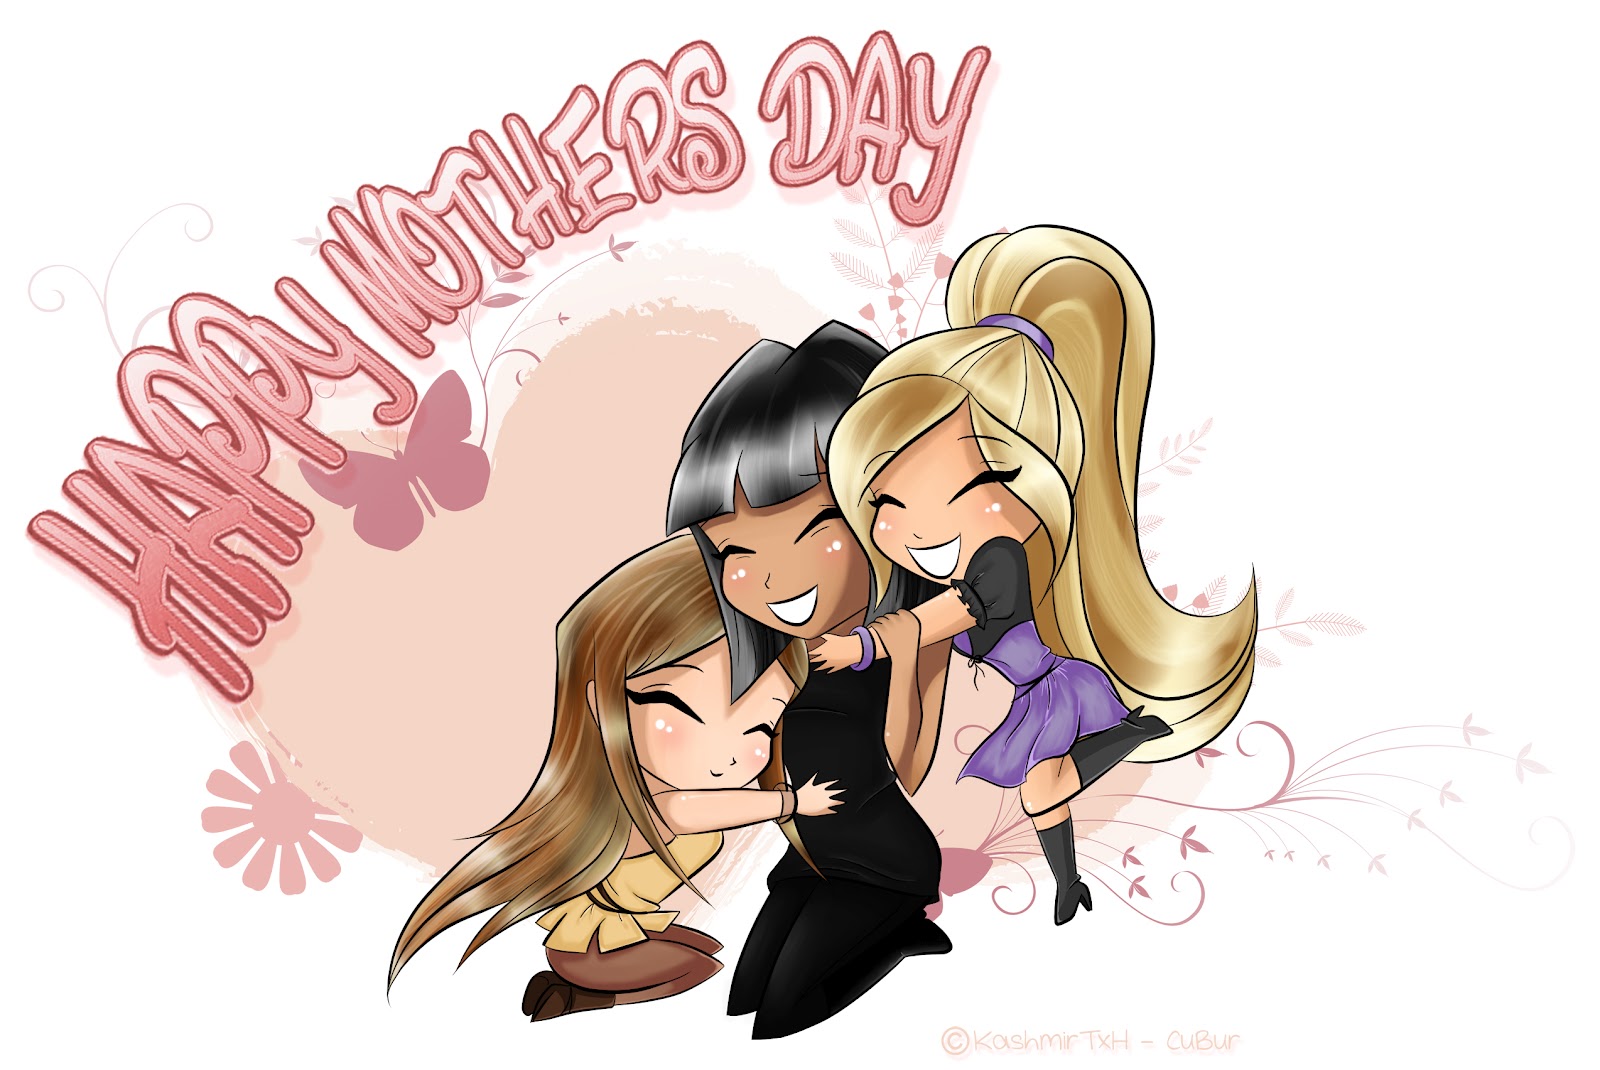 CuBur Drawings: HAPPY MOTHER'S DAY!!!